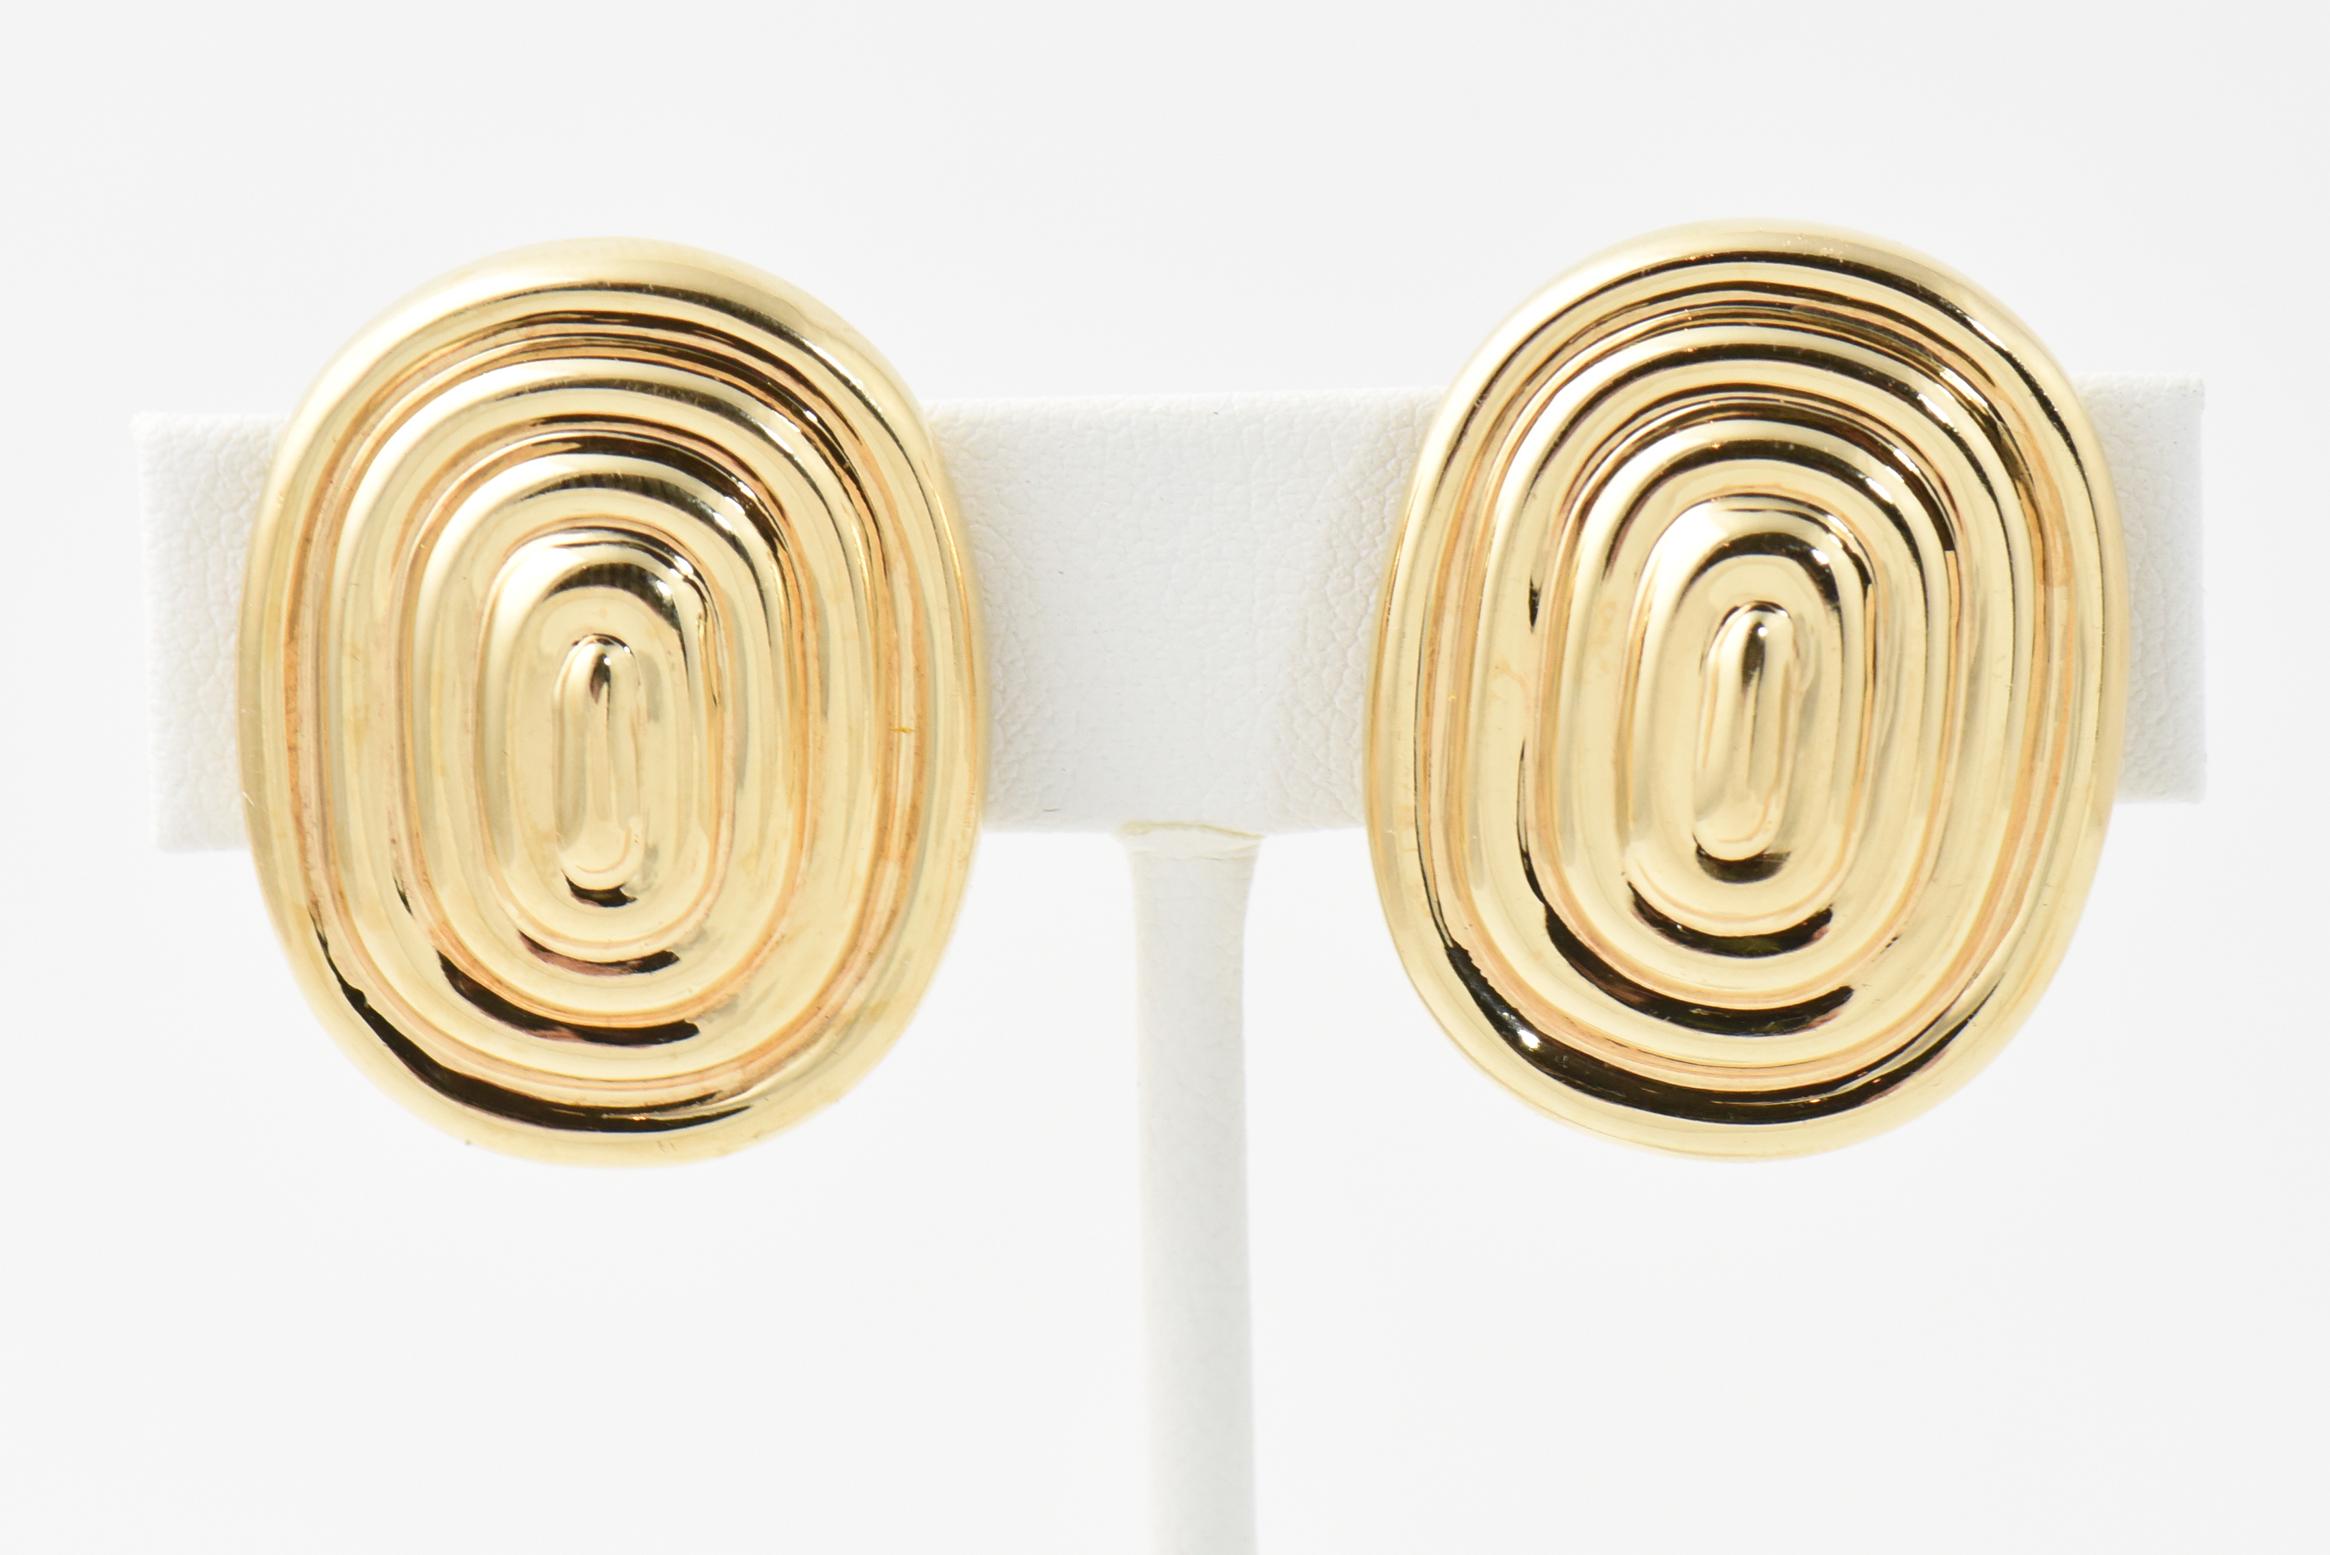 Large 14k Yellow Gold Earrings & Ring with ridged concentric oval design. Marked: 14k. Earrings, 1.12